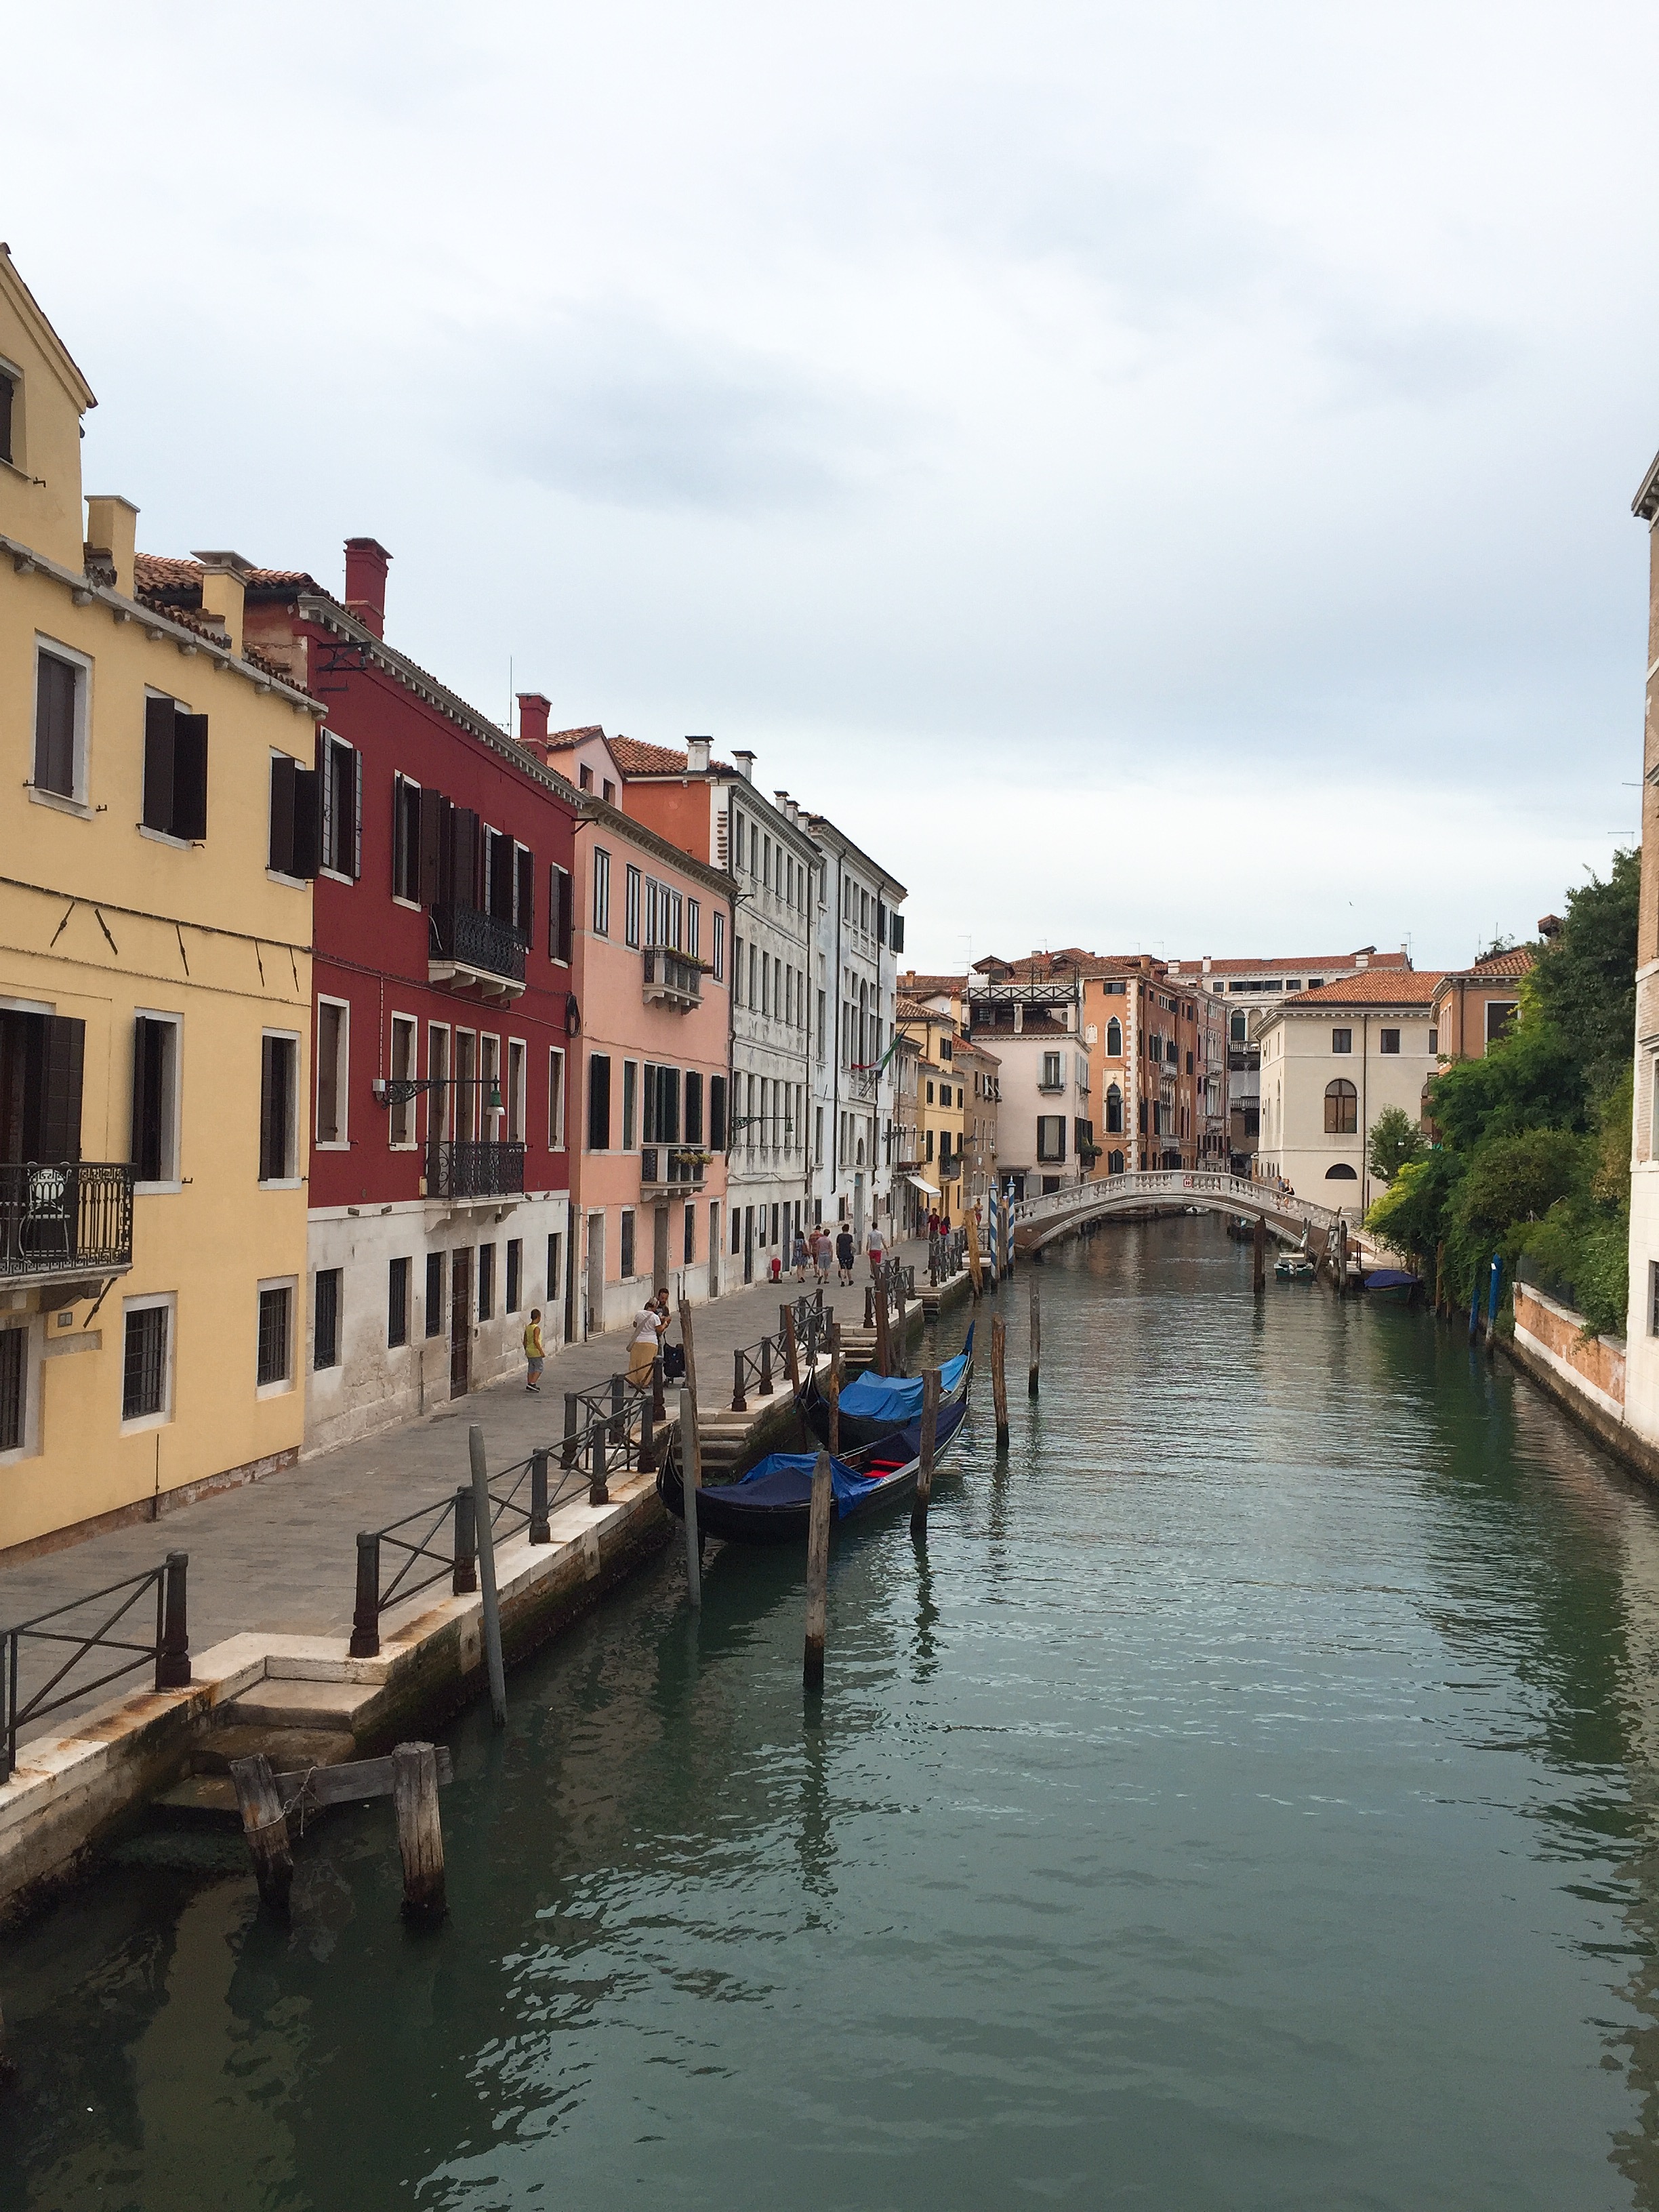 Canals in Venice - travel guide